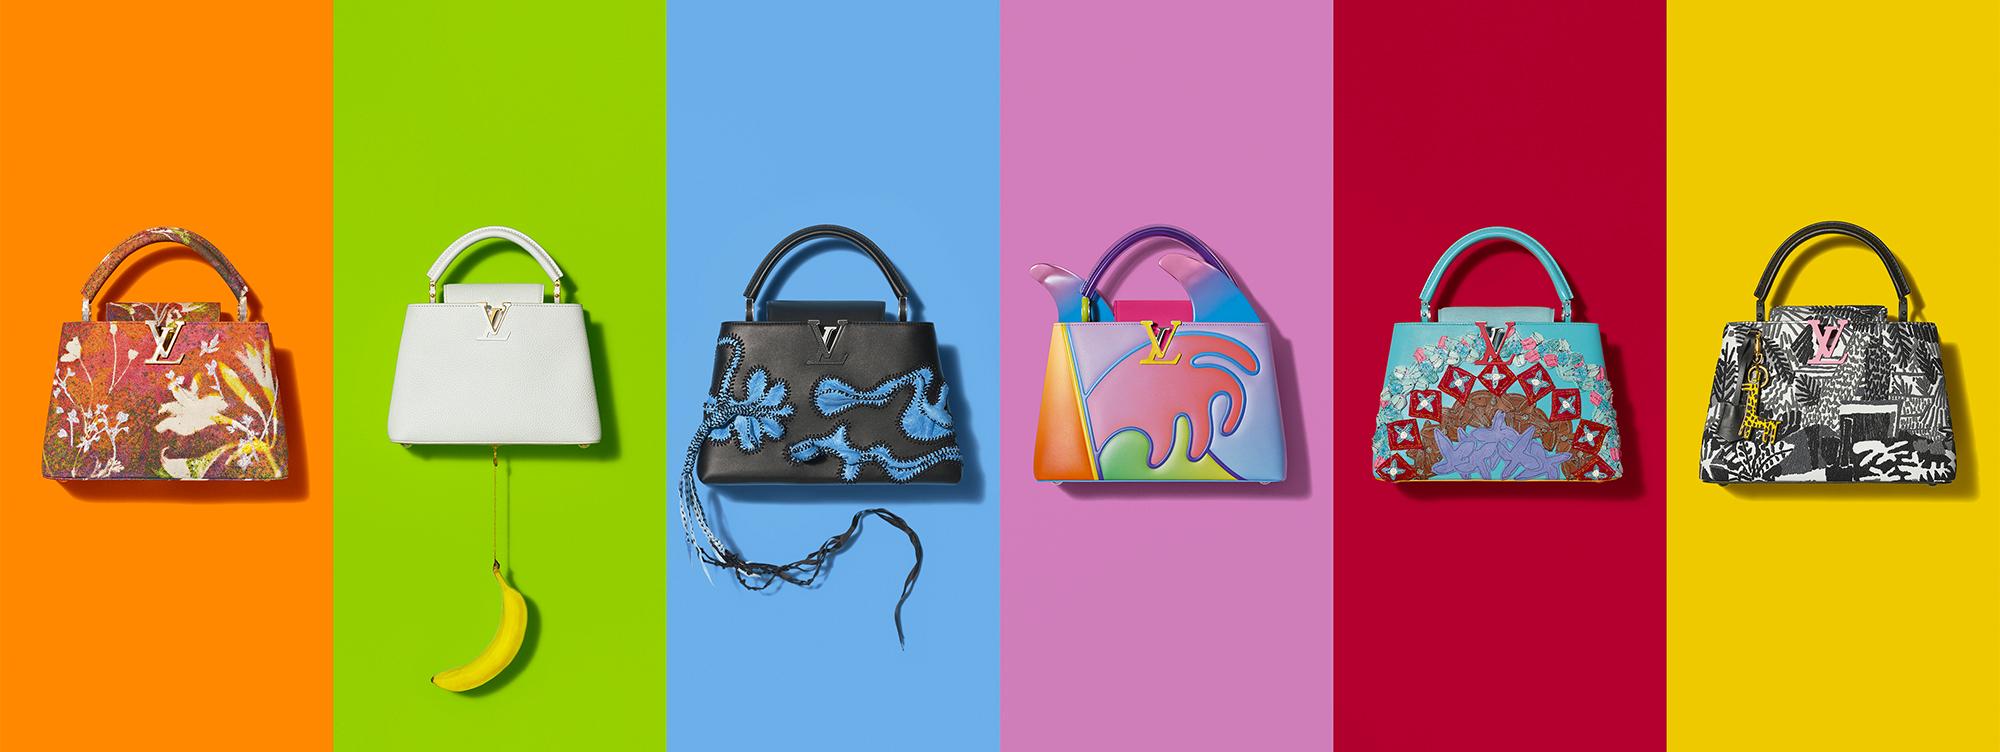 Louis Vuitton Artycapucines Collection